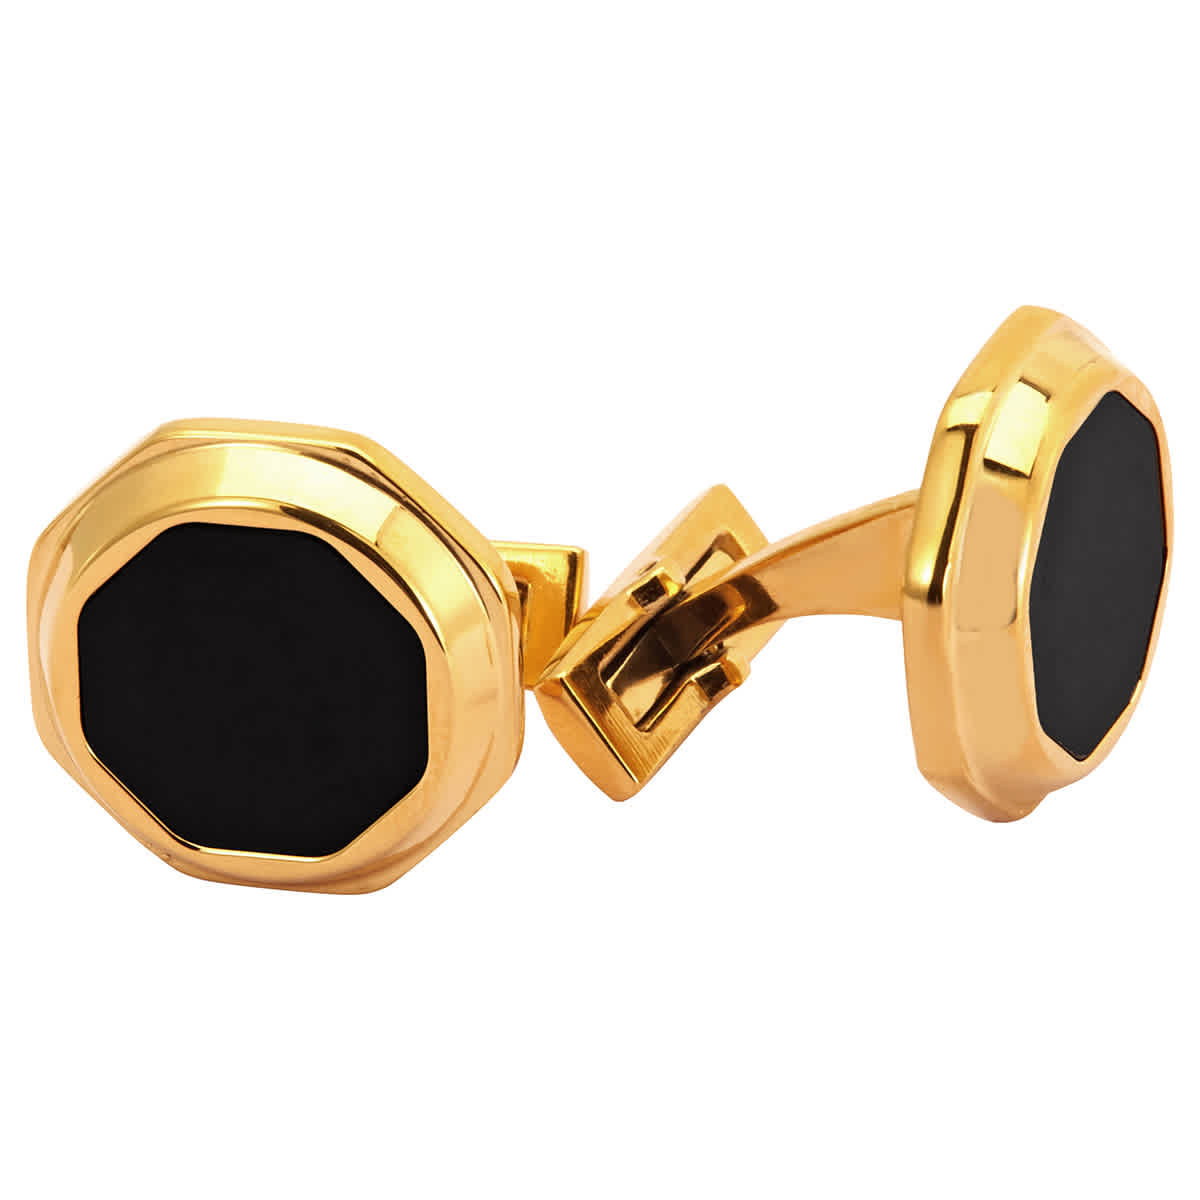 Picasso And Co 18kt Yellow Gold Plated Cufflinks In Black,gold Tone,yellow